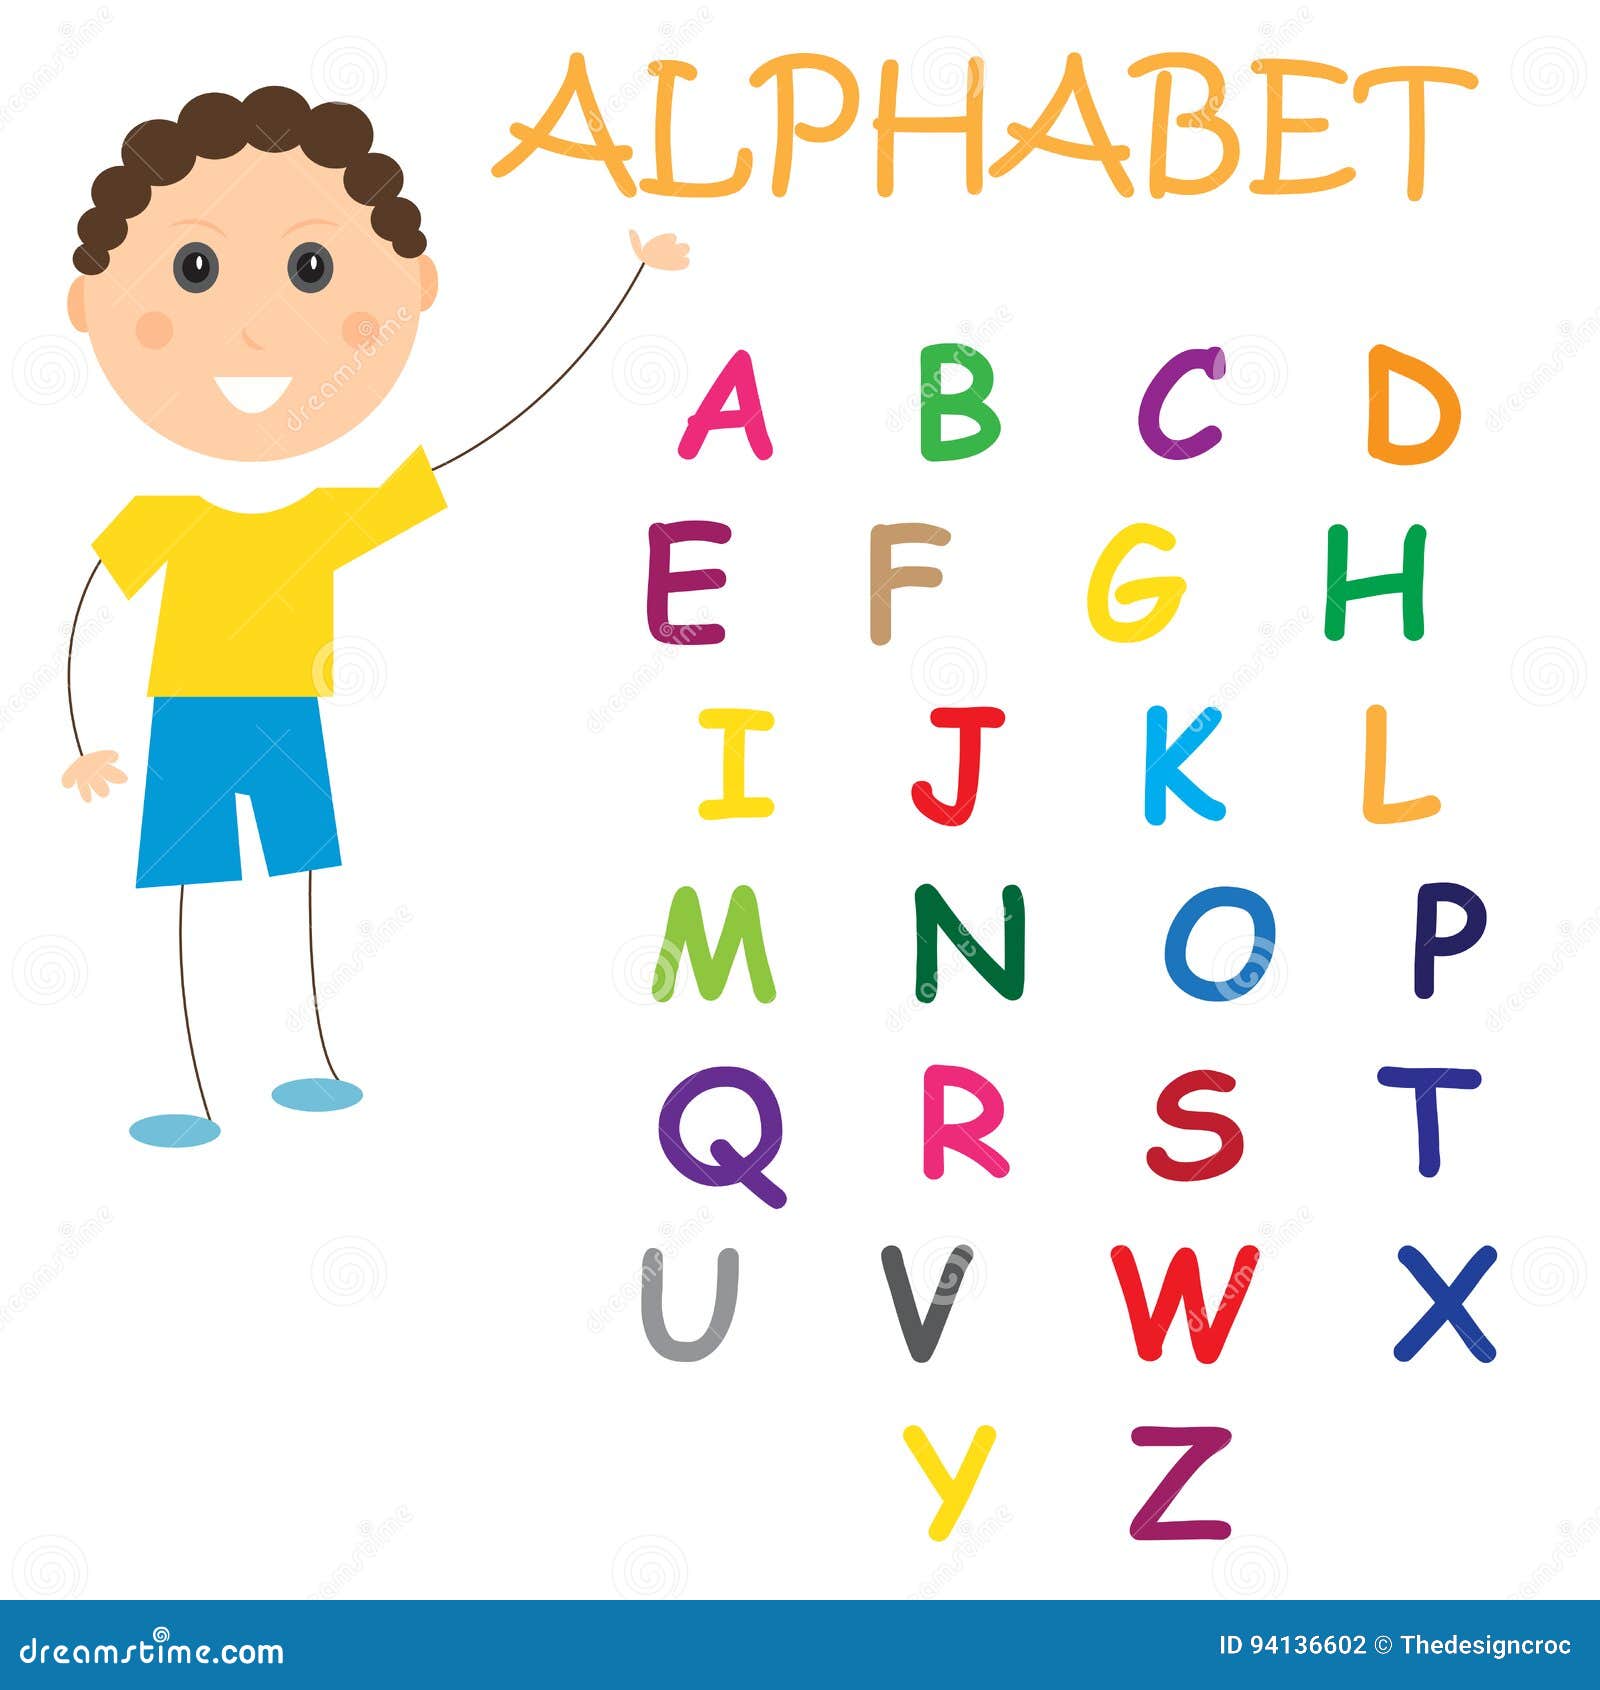 Abcd Chart Online